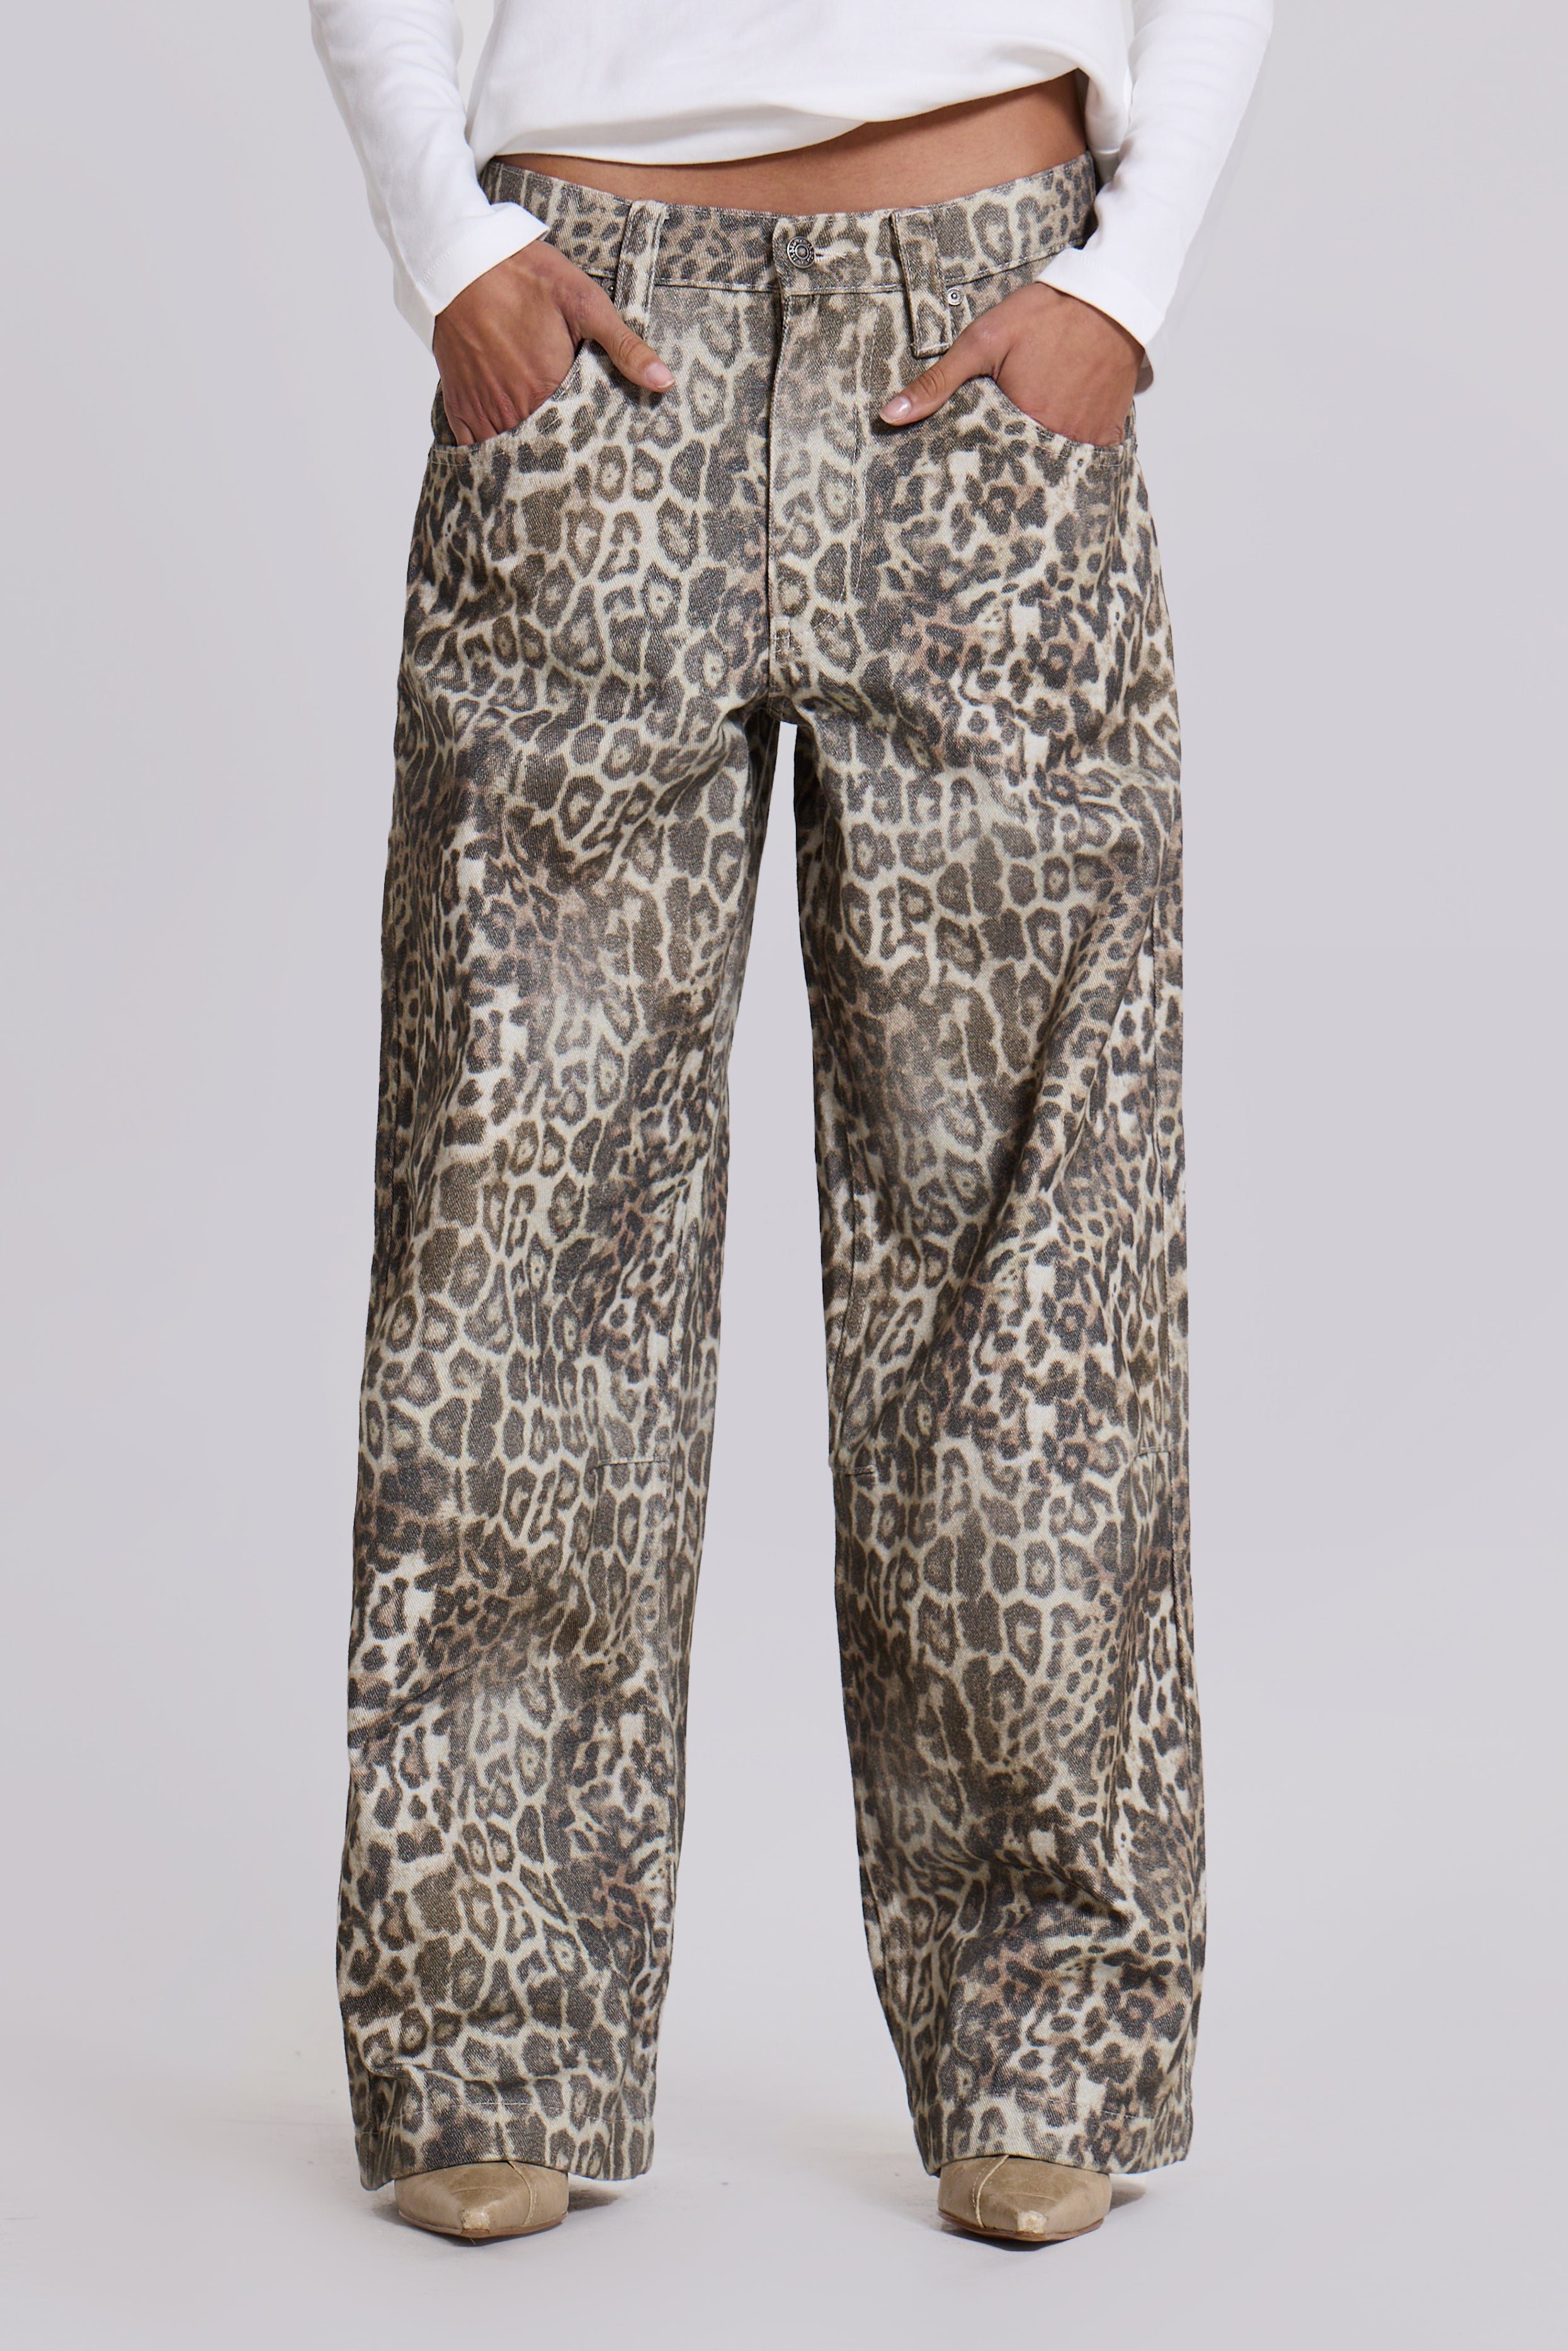 Leopard Fade Colossus Jeans – Jaded London